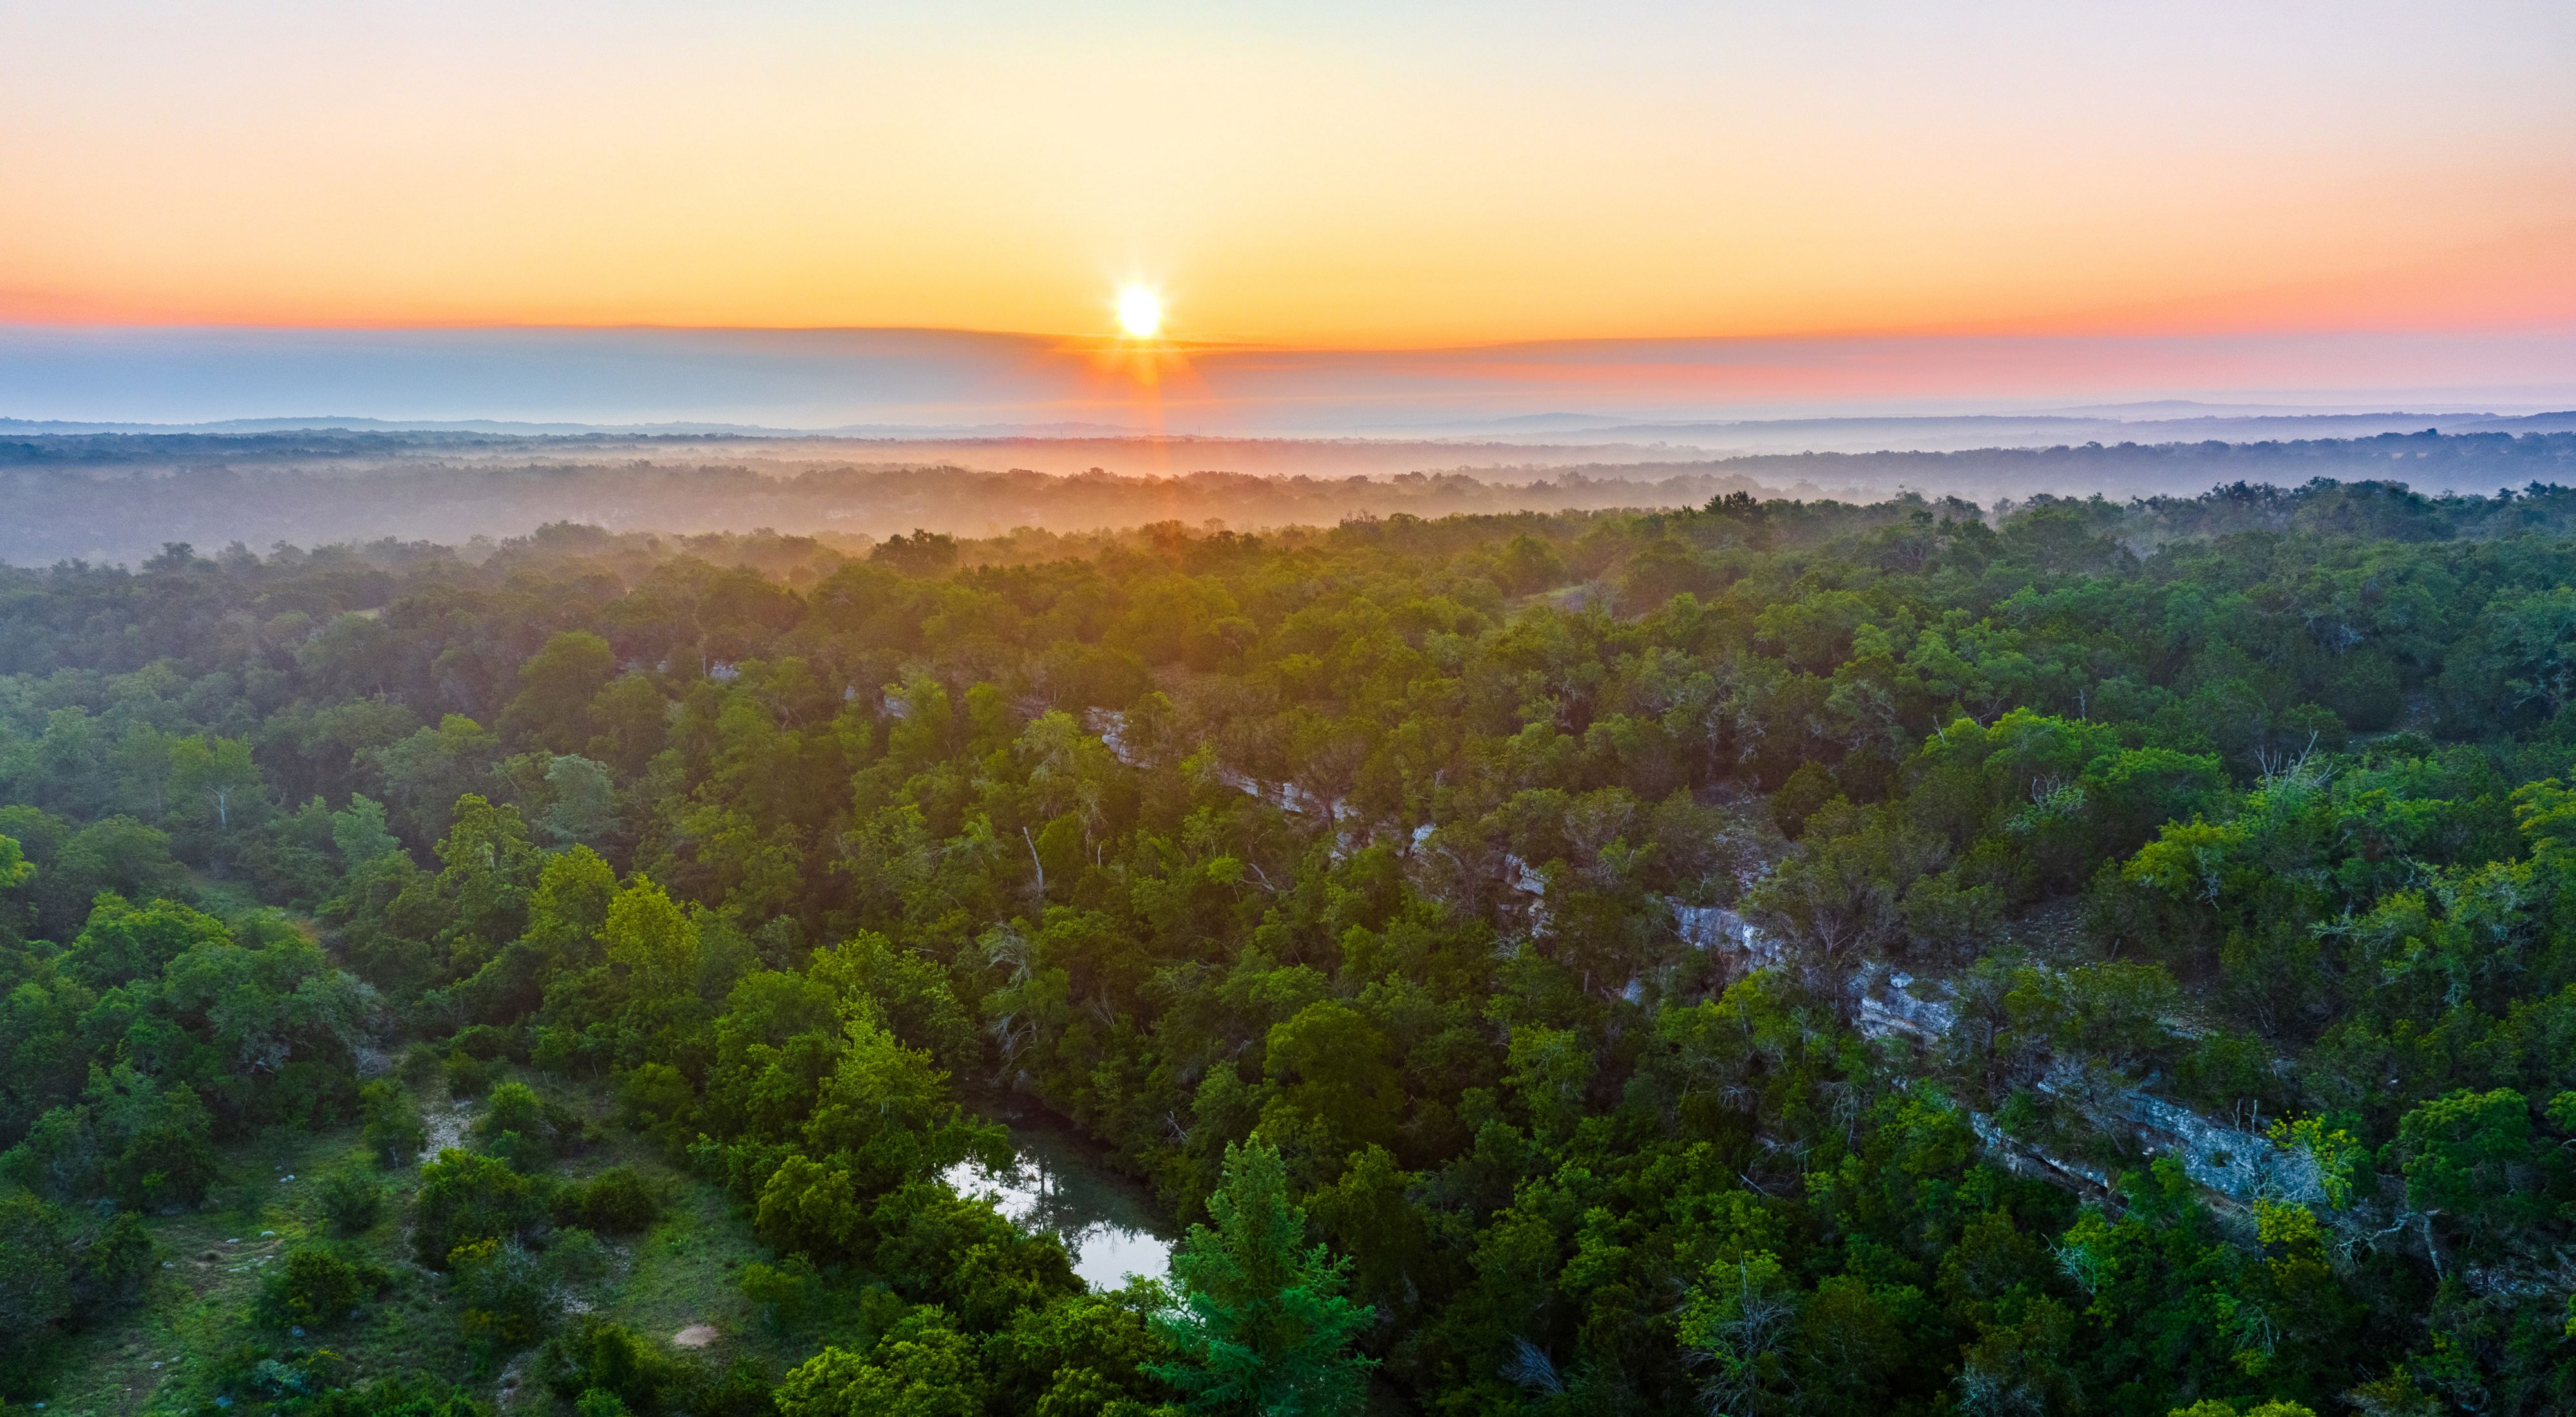 The sun rises over a vast expanse of green brush and a blue river.